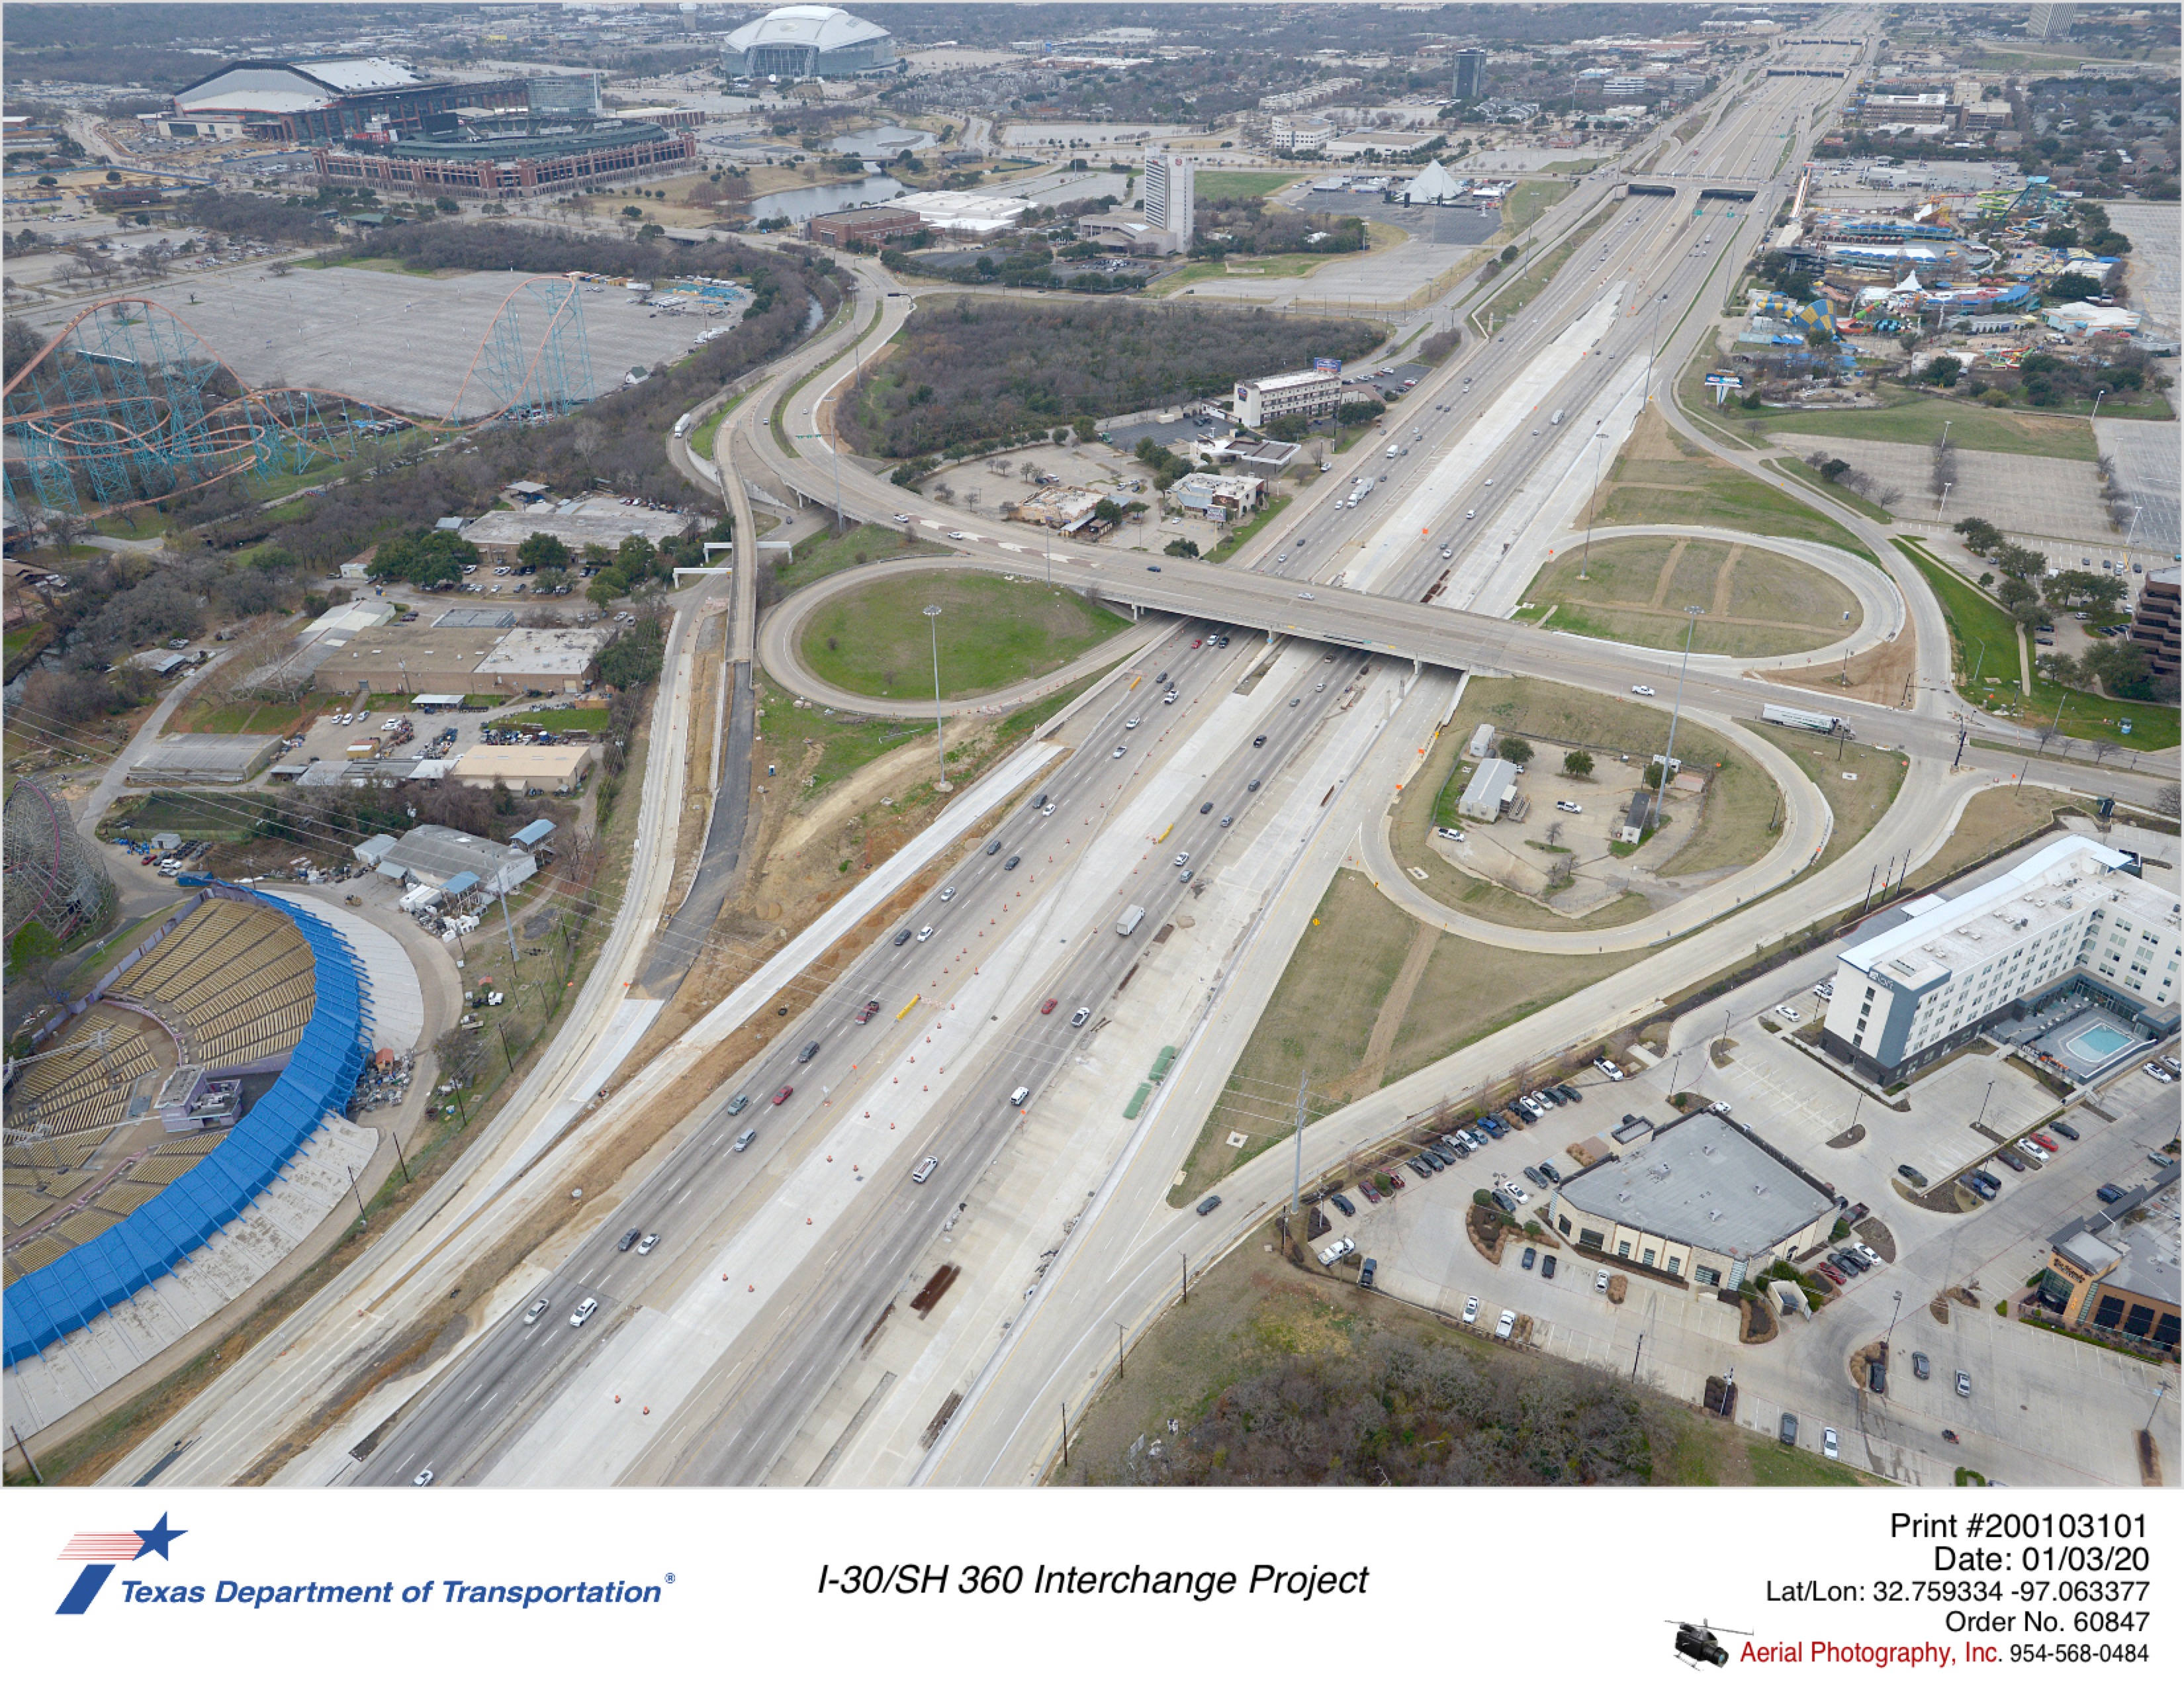 I-30 looking southwest with Ballpark Way interhcange in mid-ground. Active construction shown on Copeland Rd and new eastbound exit to Copeland Rd.